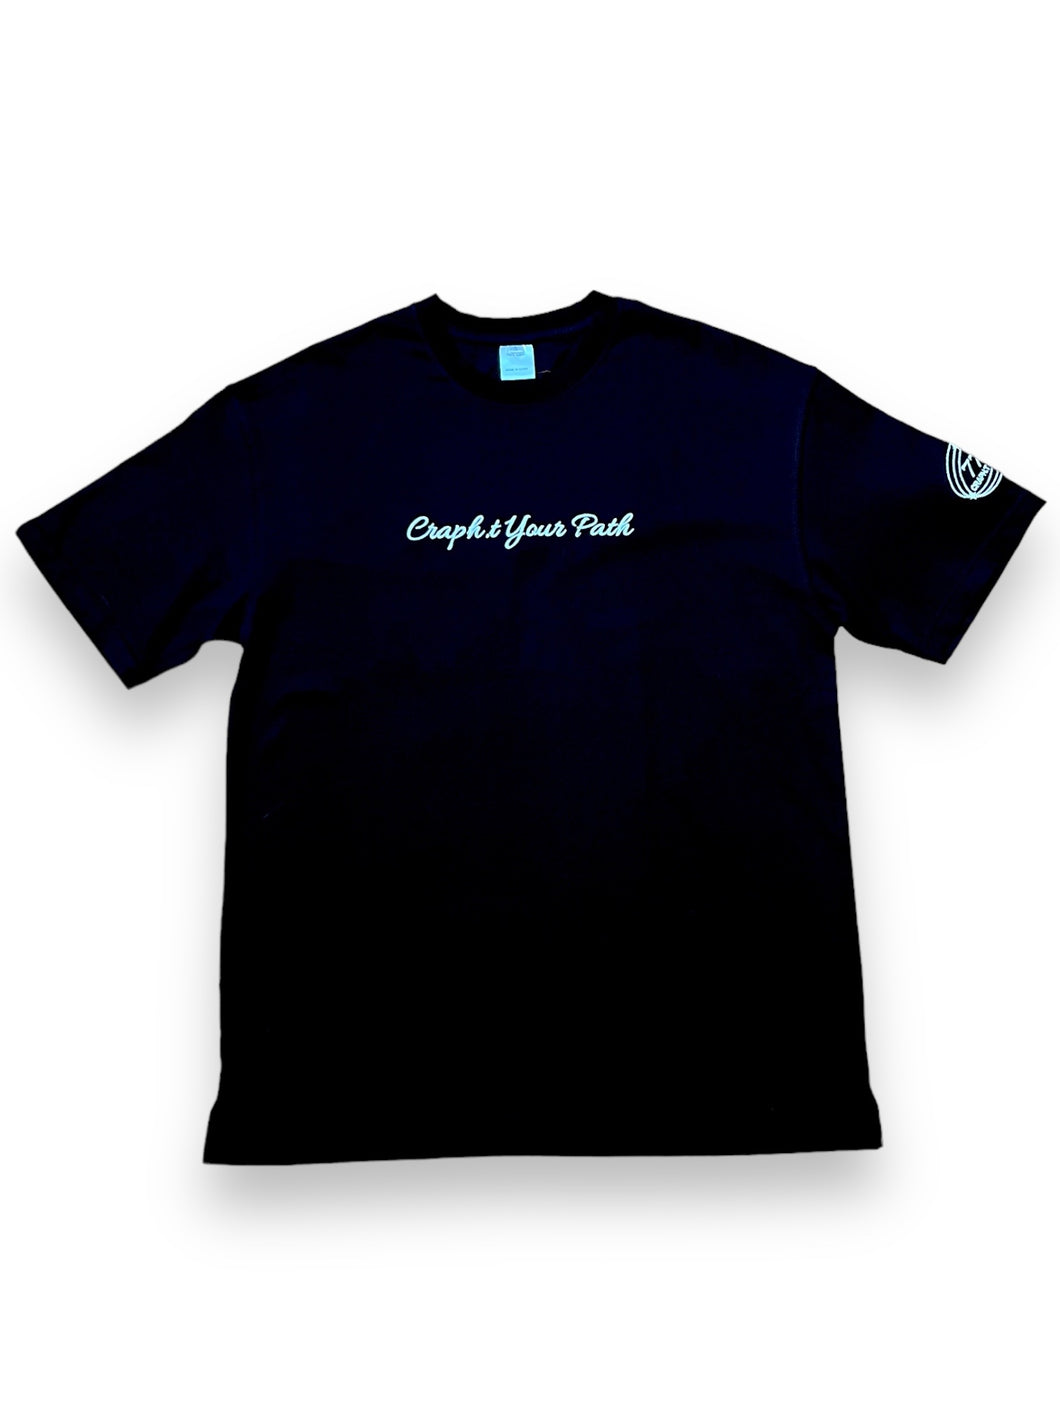 CRAPHT YOUR PATH T-Shirt (Black x Glow)